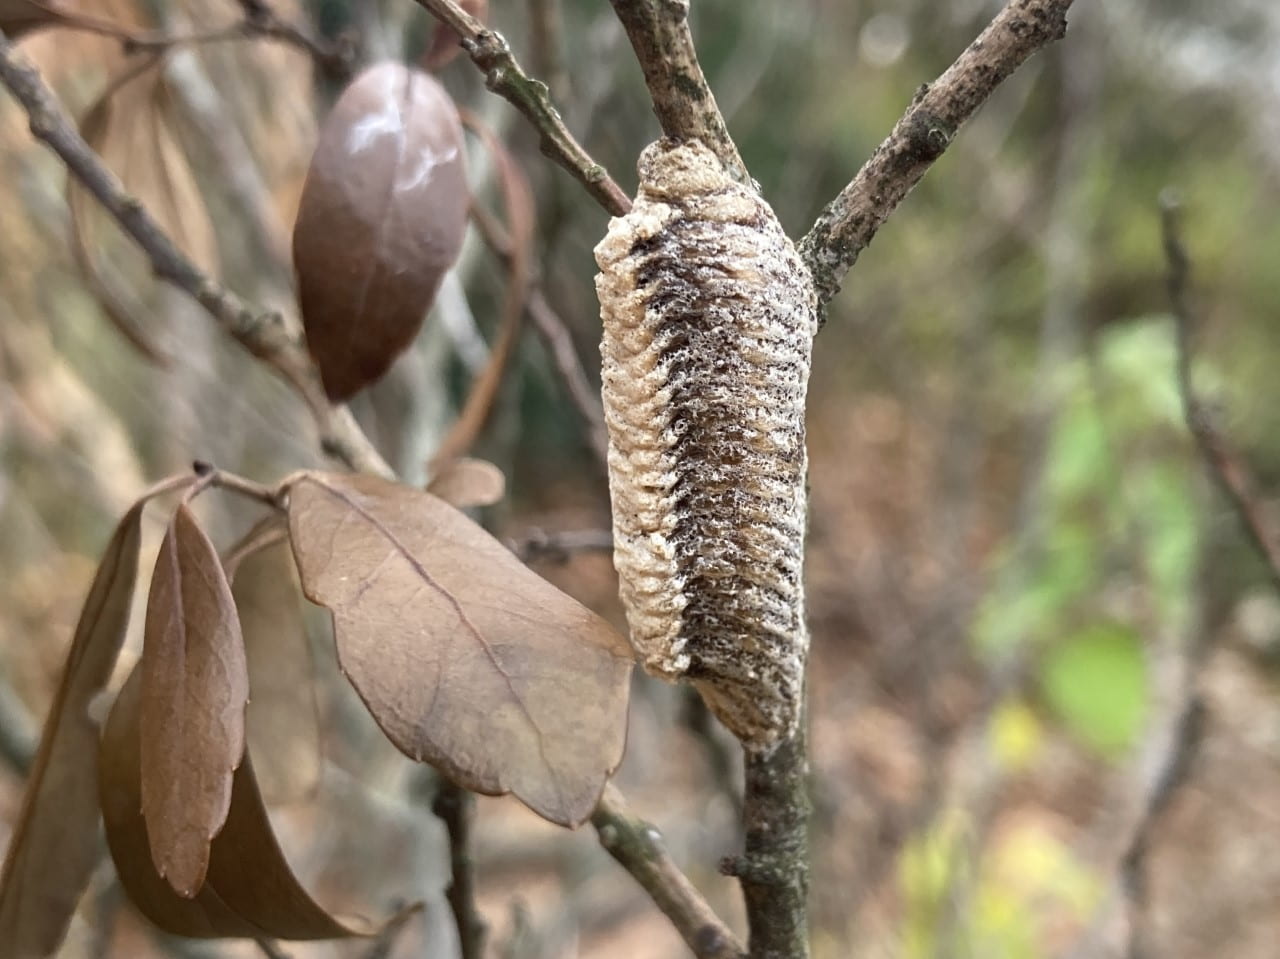 This egg case belongs to our native mantid, Stagmomantis carolina. It can be differentiated from the invasive Chinese species by its elongated shape.